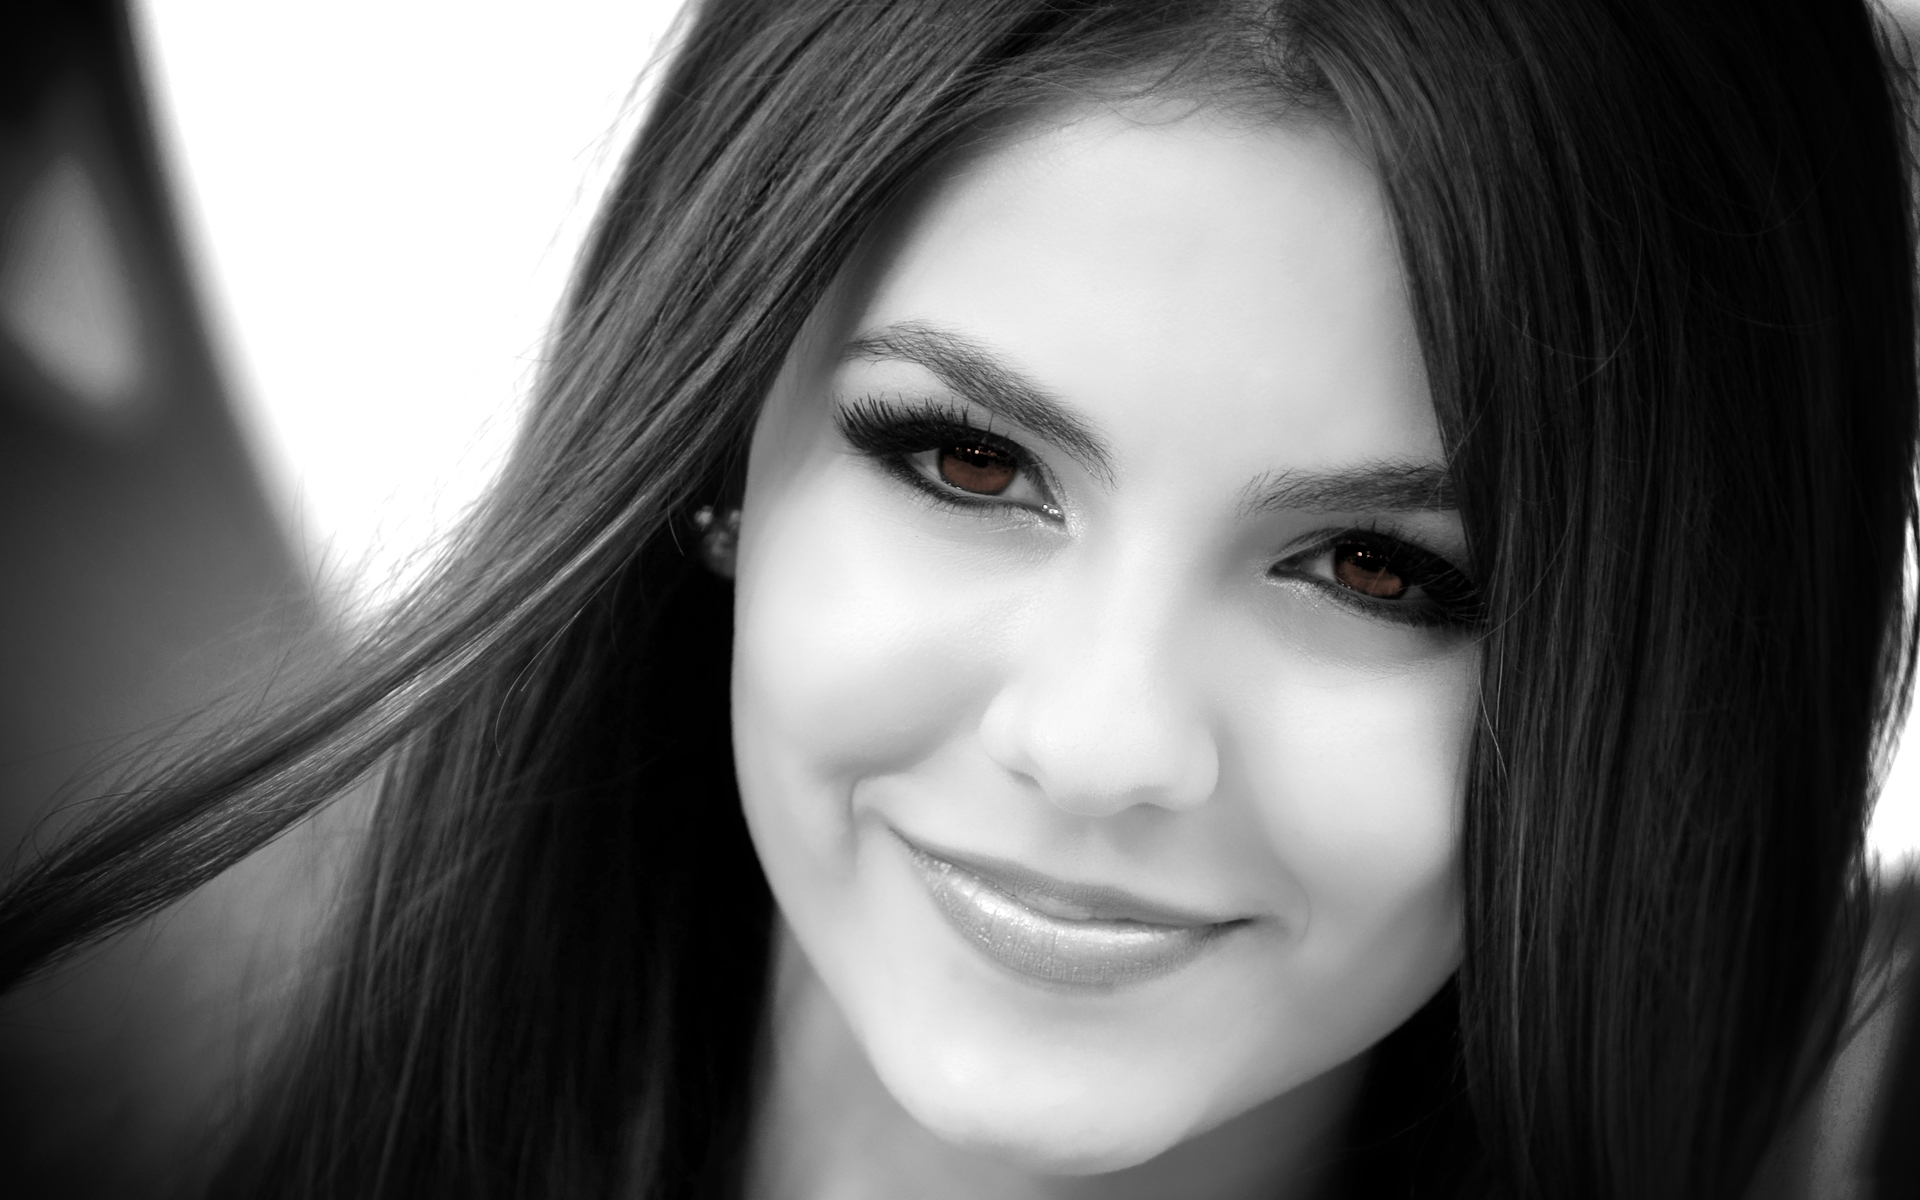 Victoria Justice beautiful face hd wallpapers - Wallpaperss HD